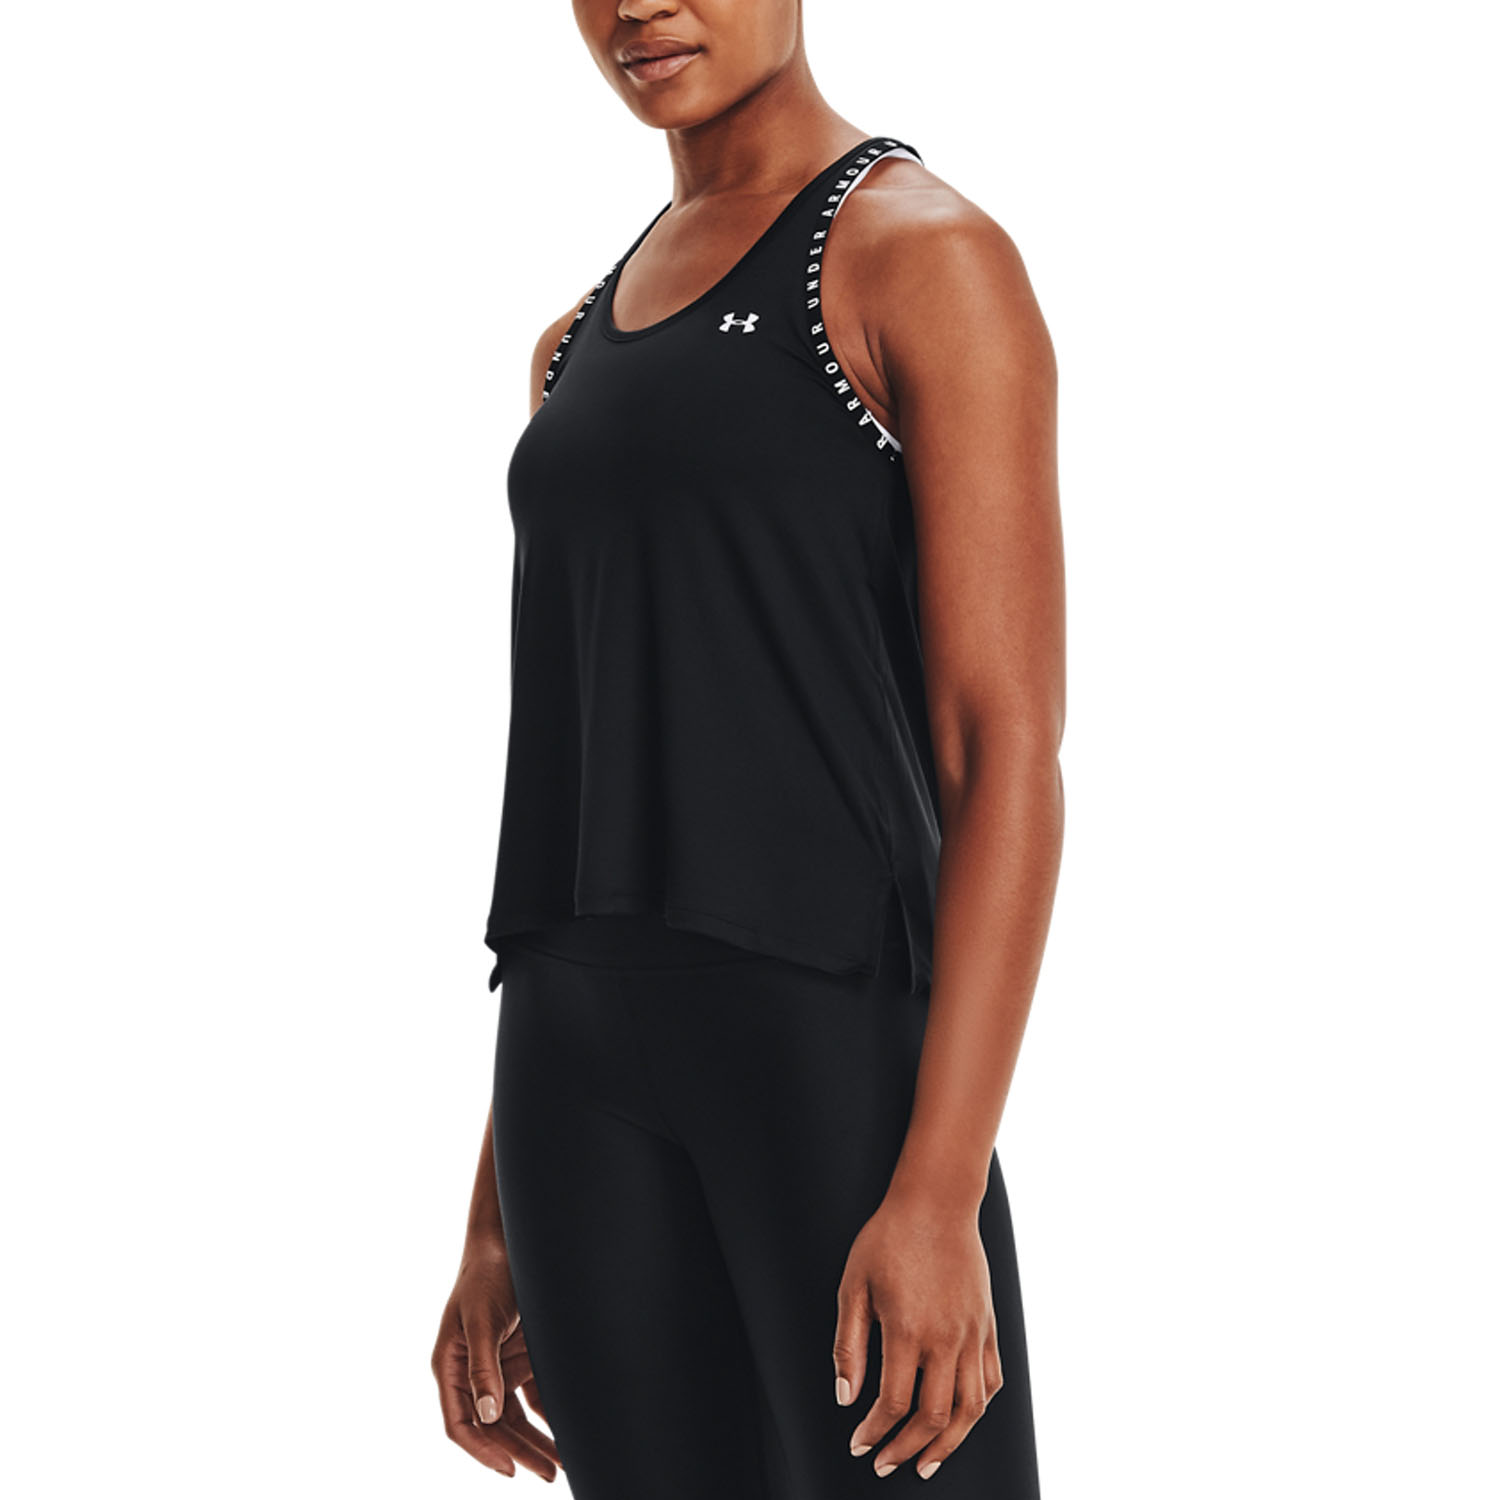 Under Armour Knockout Top - Black/White